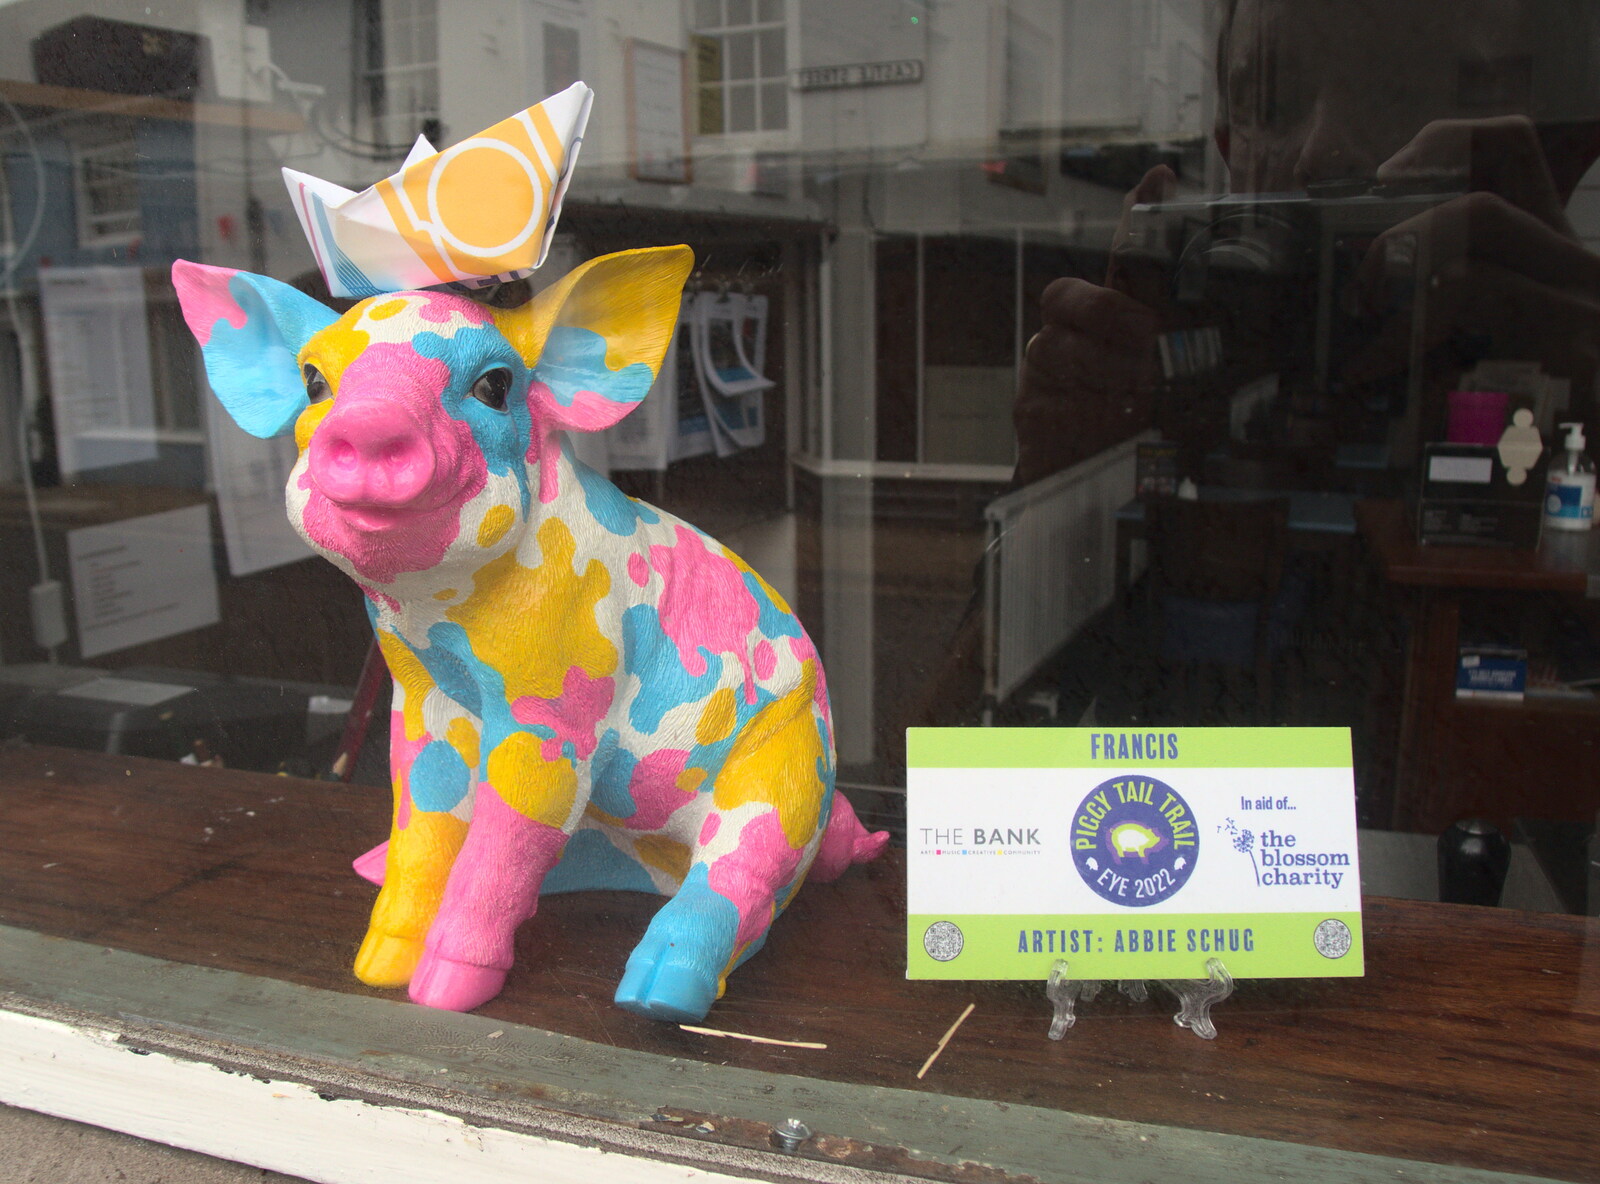 The Eye Piggy Tail Trail and Ipswich Dereliction, Suffolk - 29th July 2022: A bright pastel piglet called Francis